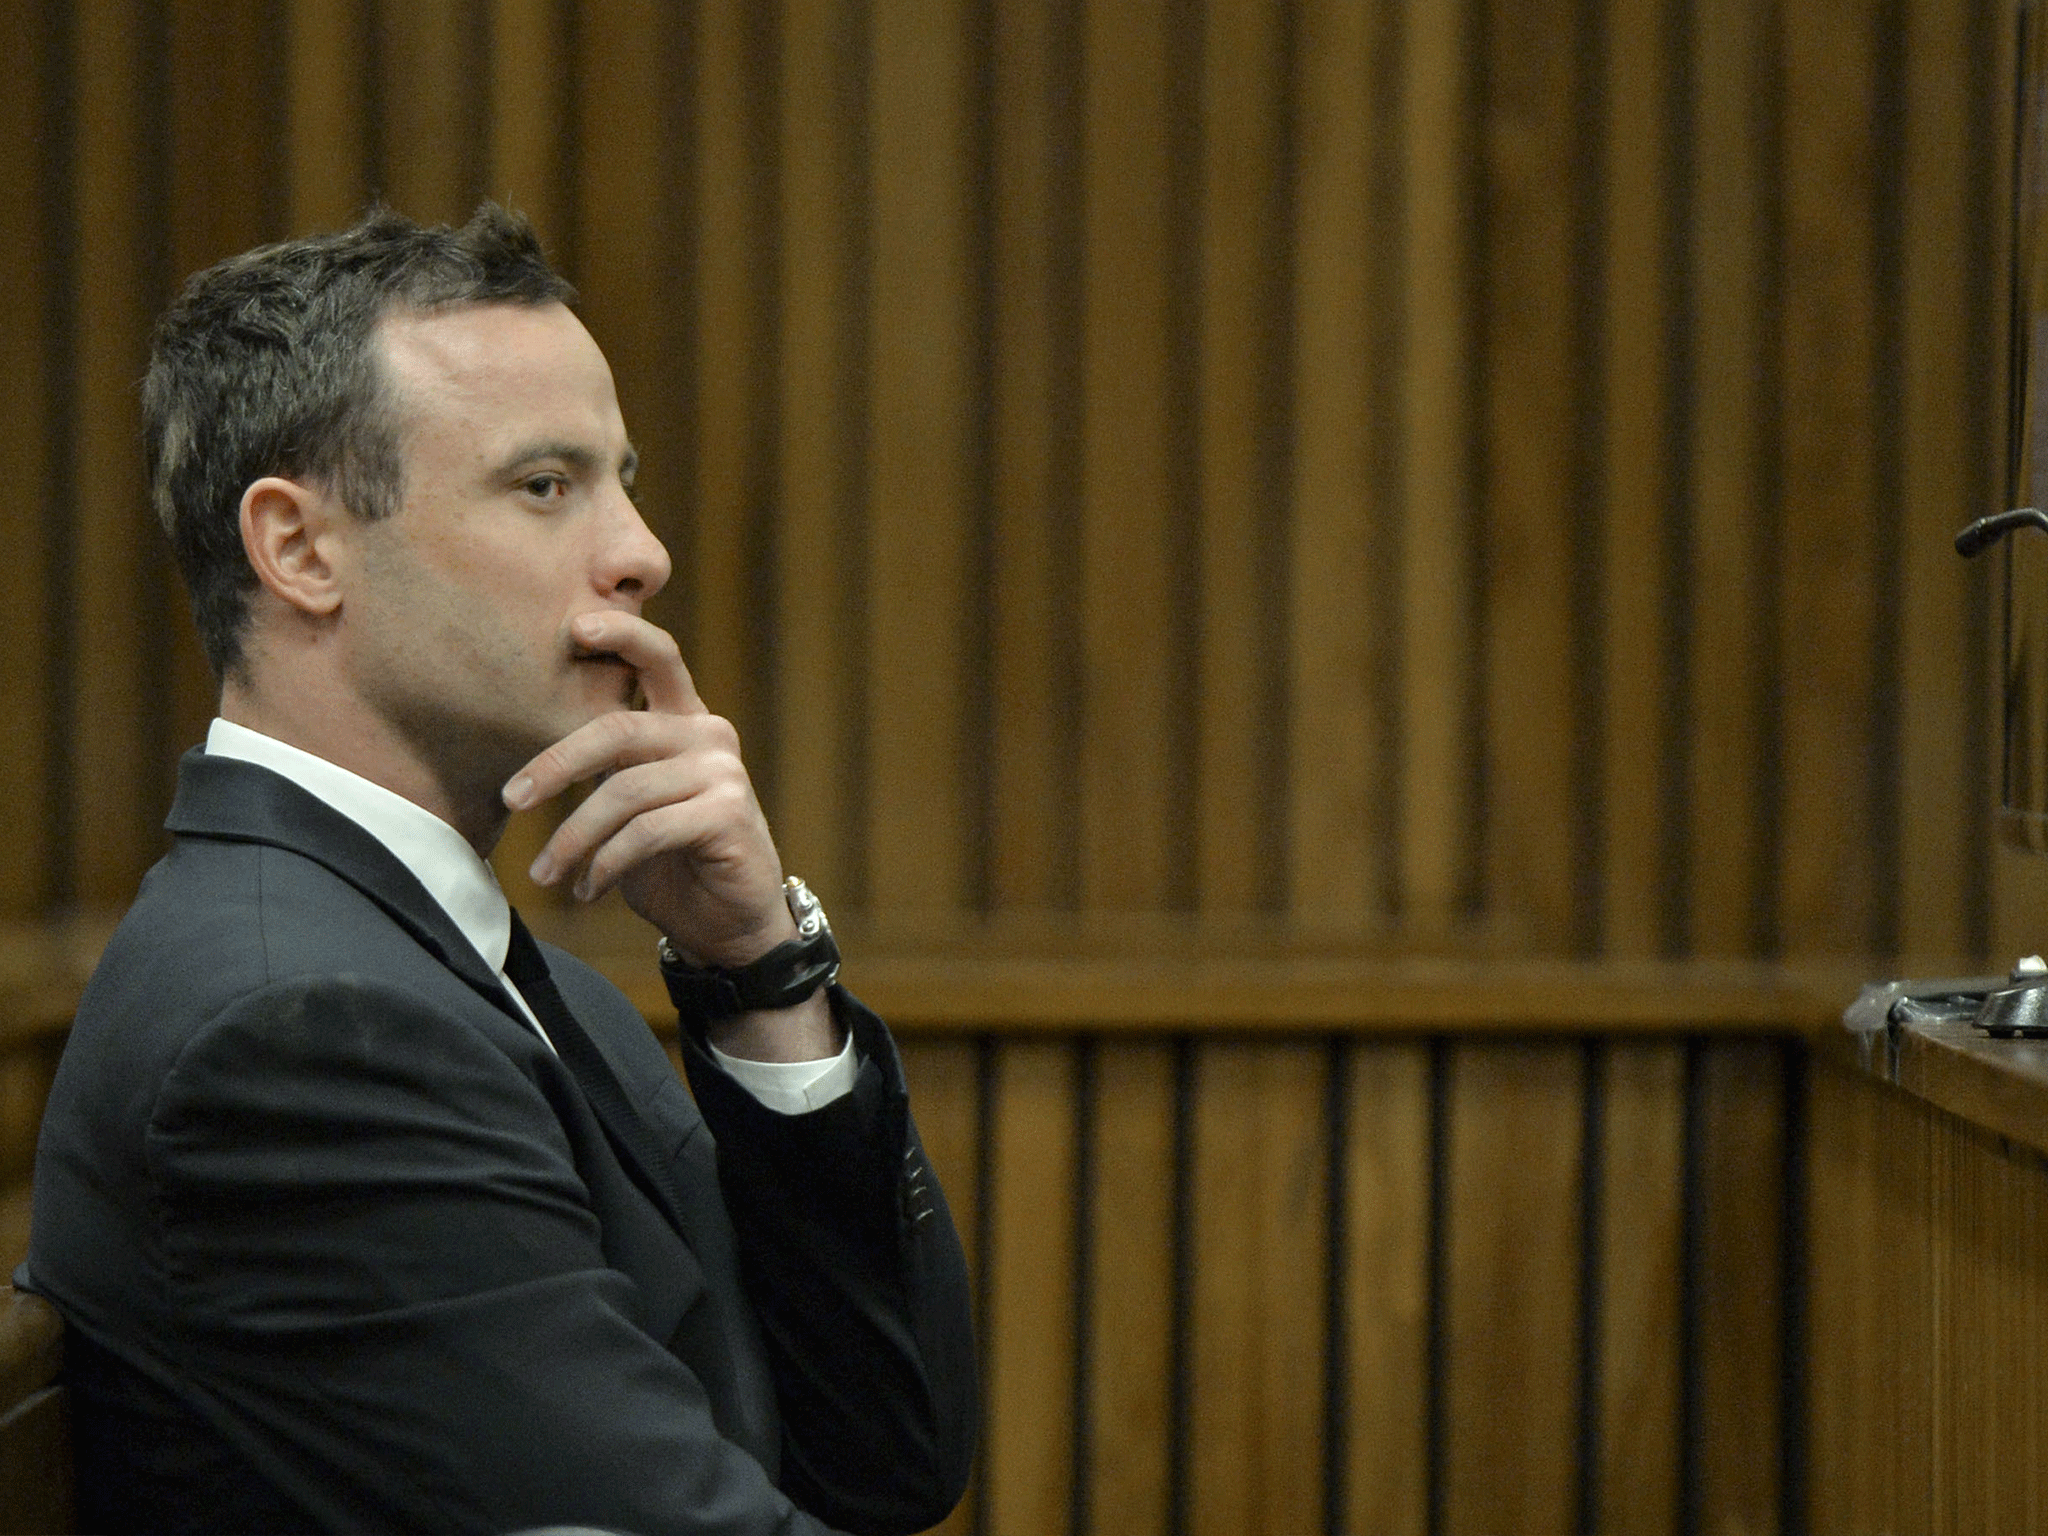 Oscar Pistorius in the Pretoria High Court on July 3, 2014, in Pretoria, South Africa. Oscar Pistorius stands accused of the murder of his girlfriend, Reeva Steenkamp, on February 14, 2013